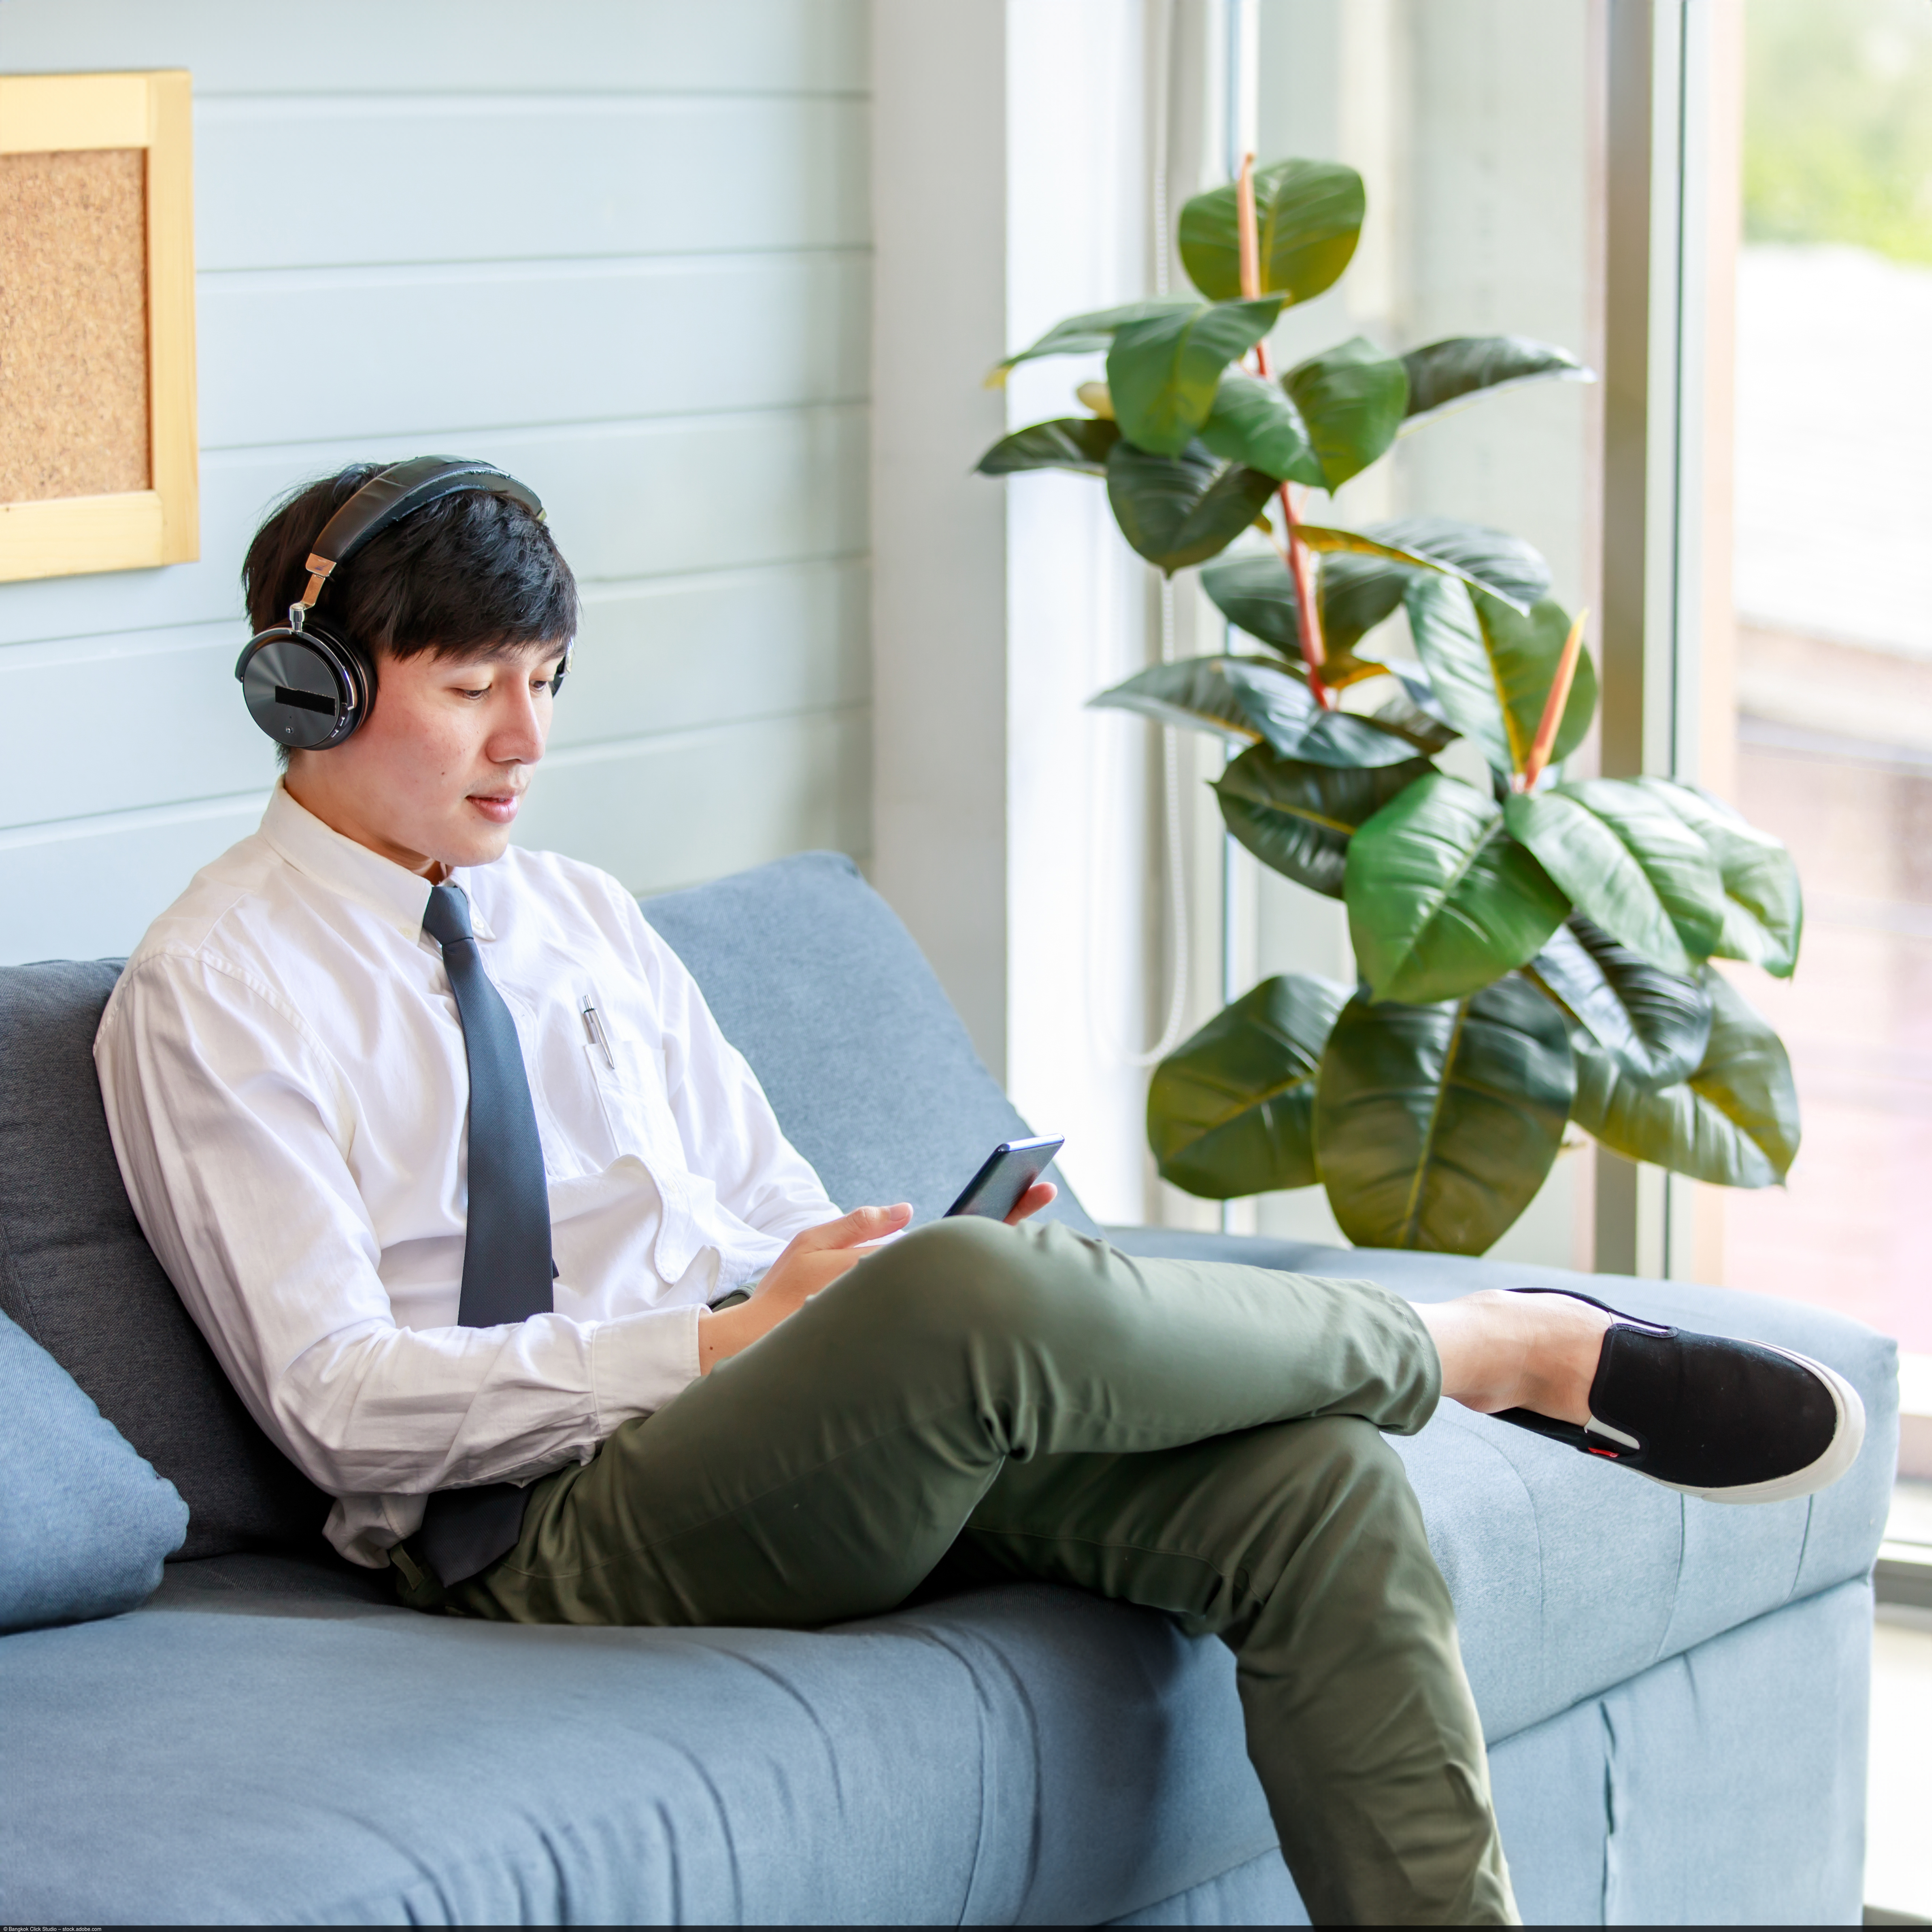 A young man sits on a couch and listens to music via smartphone and headphones. In the background is a green houseplant.